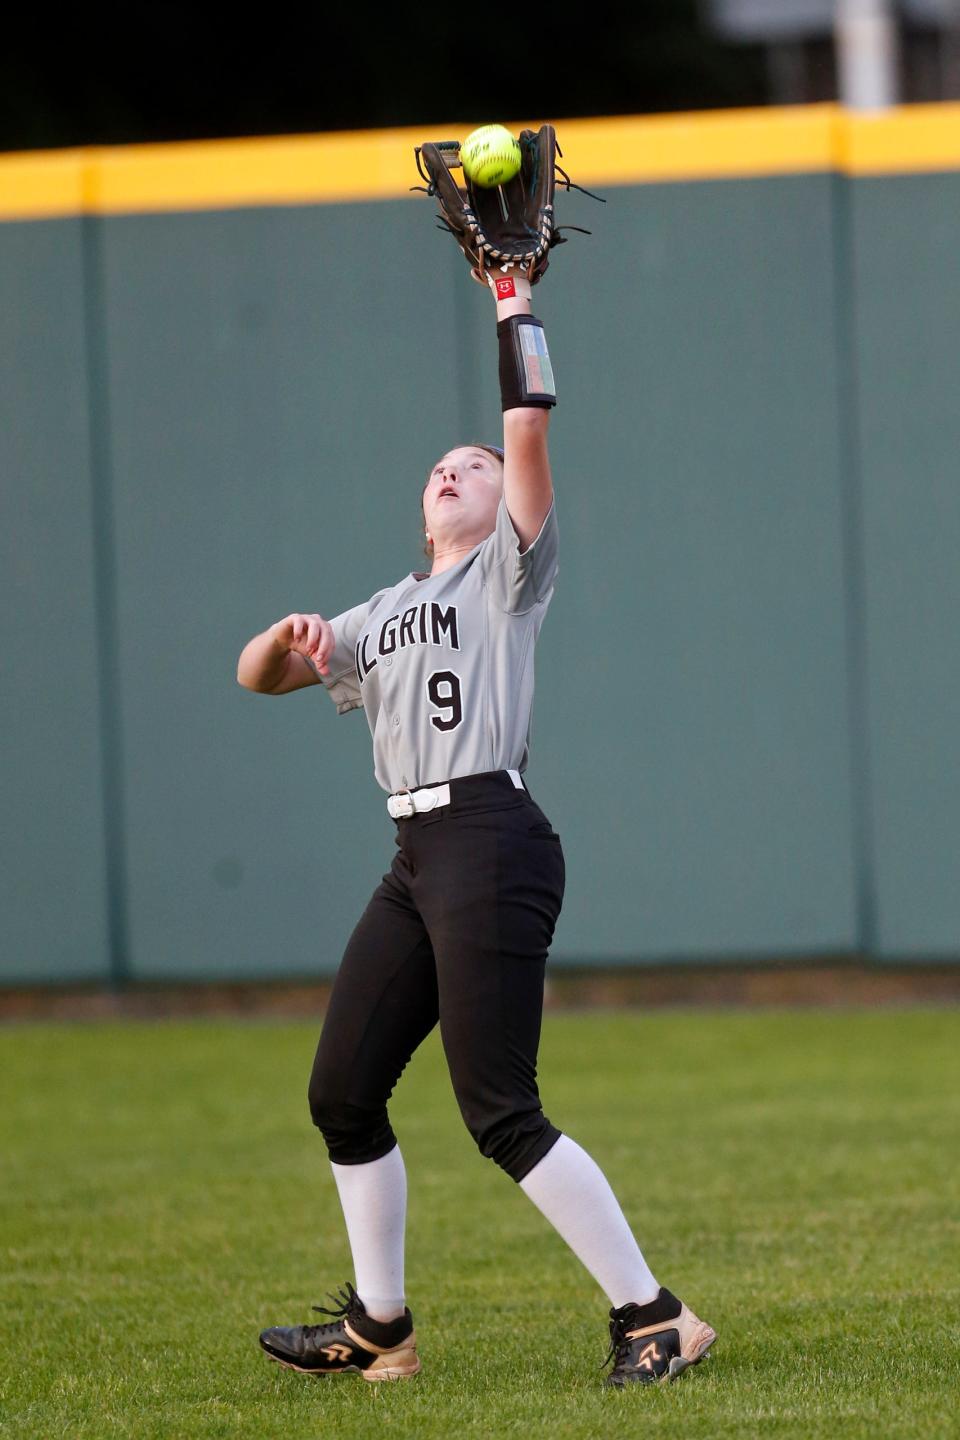 Pilgrim's Marin Prest, seen here making a play in a game last season, doubled in the winning run the Patriots' 5-4 victory over Chariho on Monday.